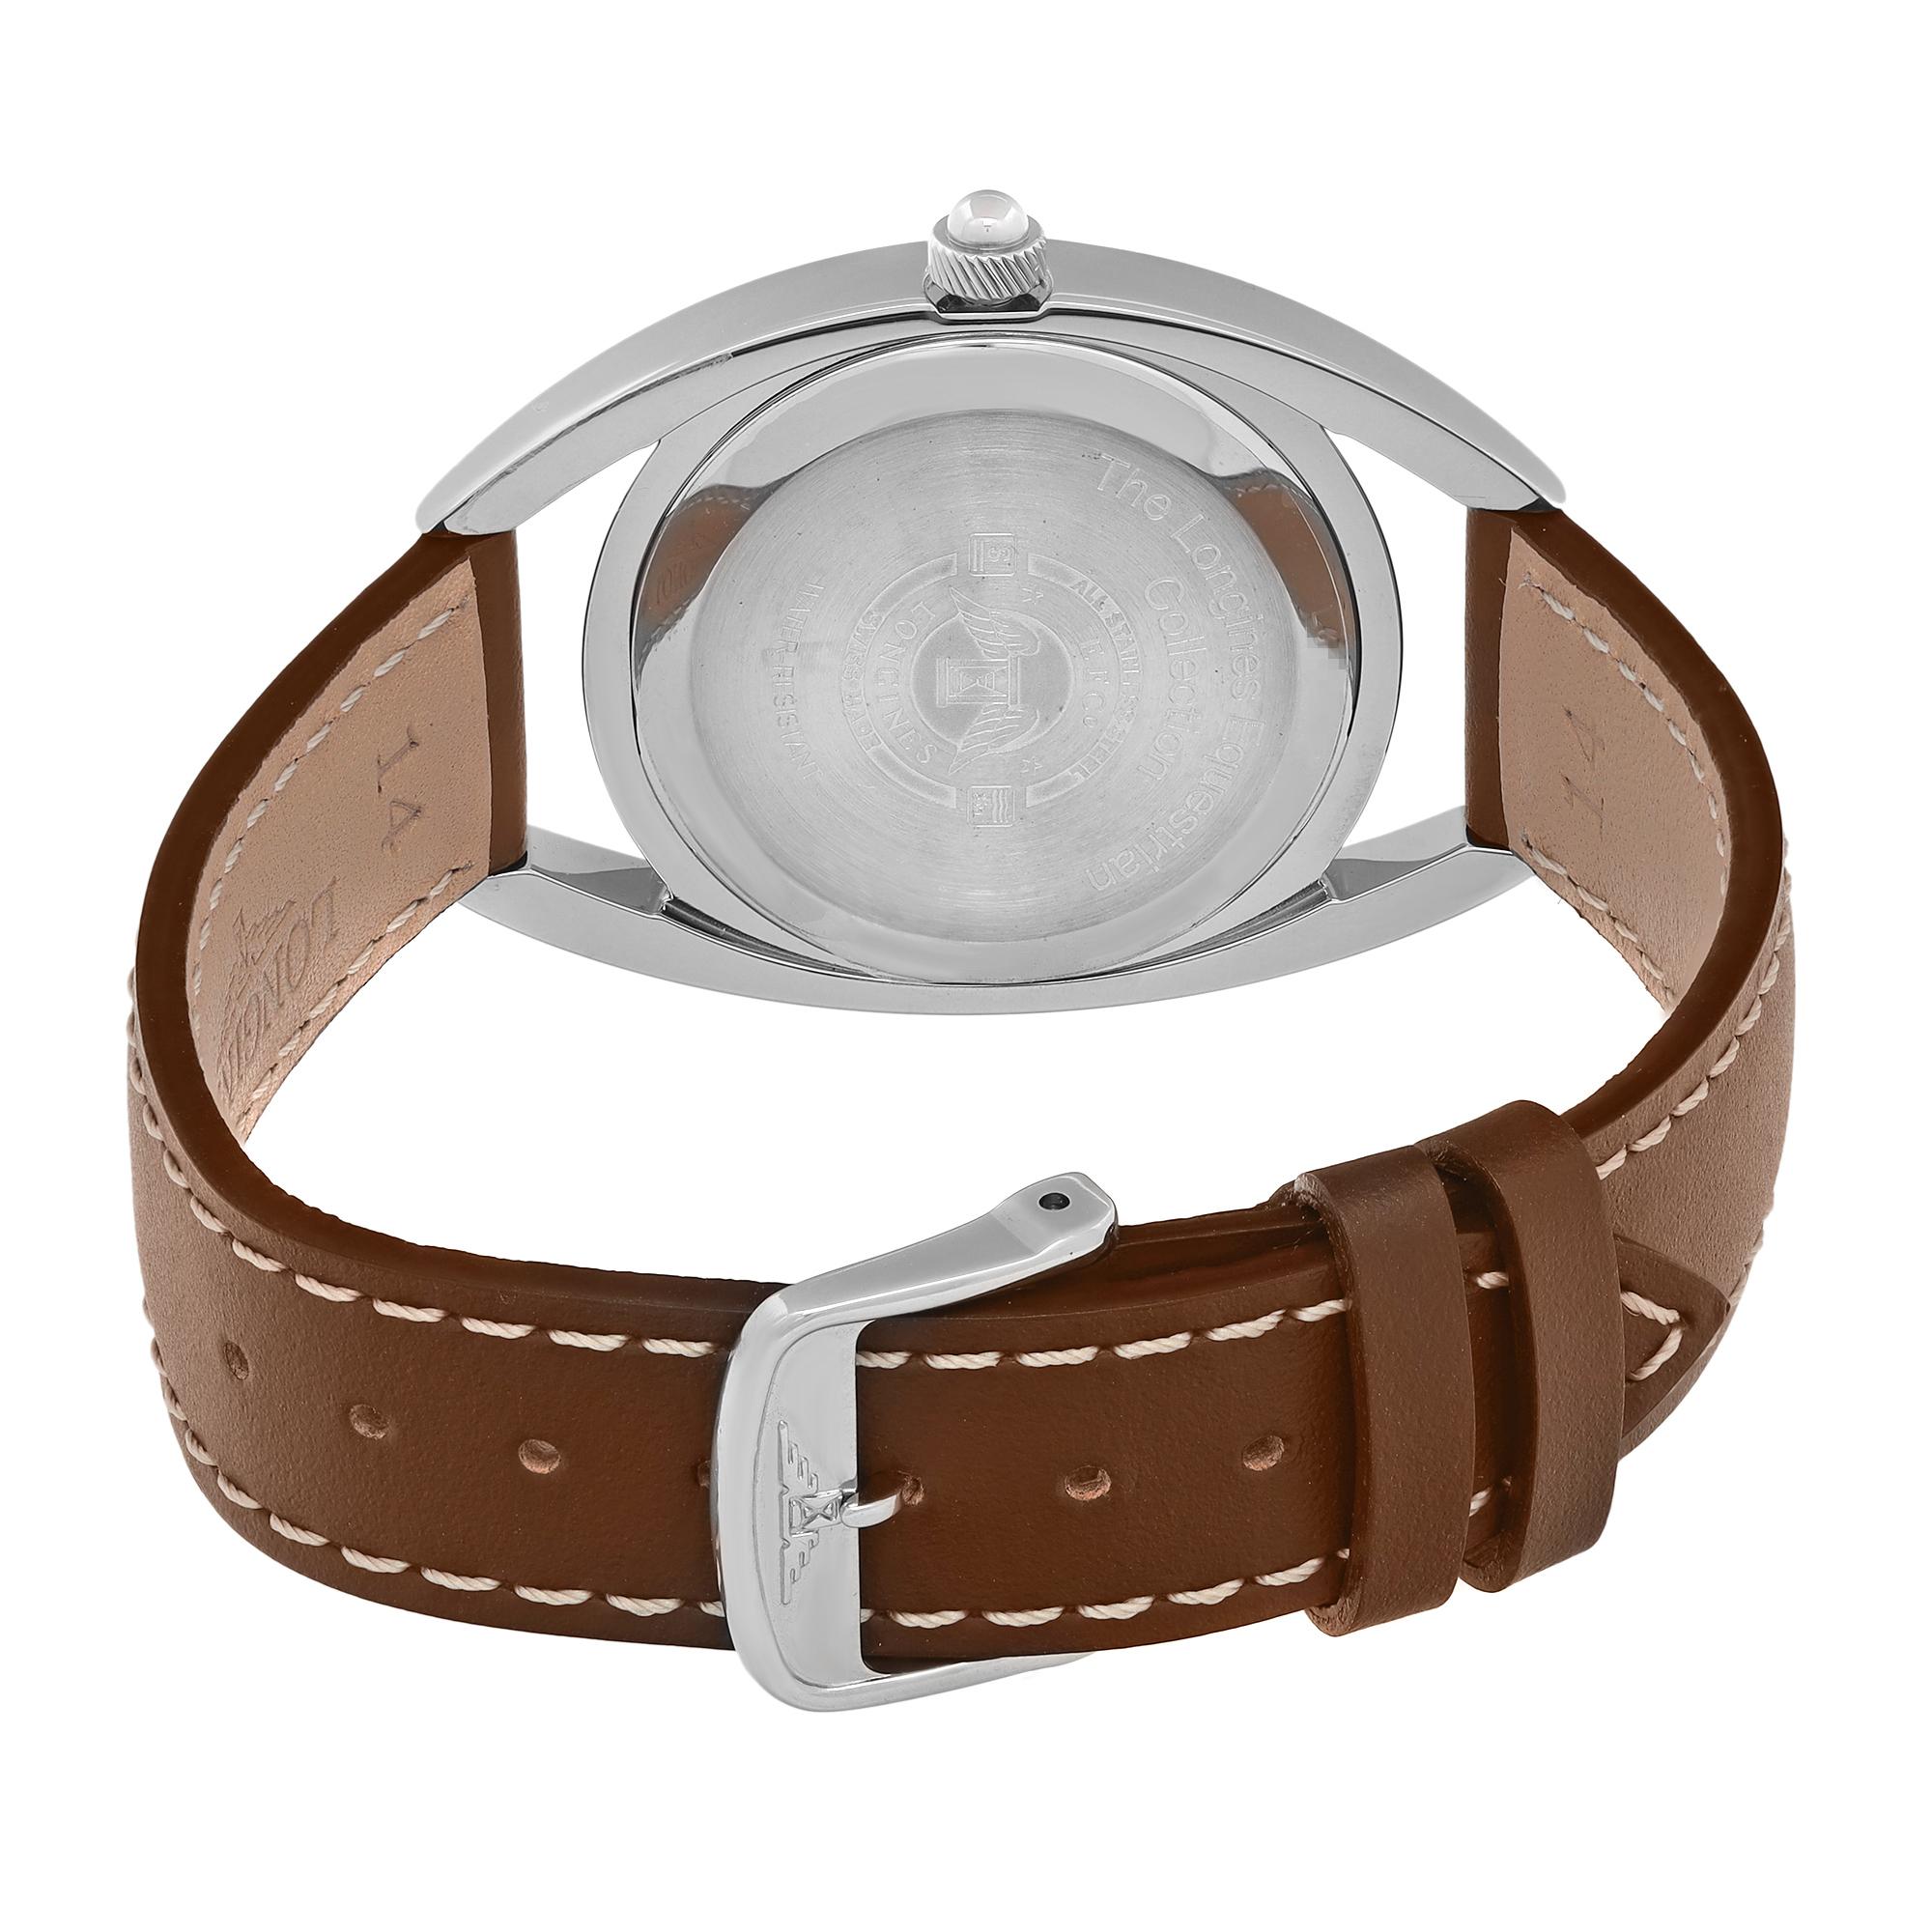 Display Model. No signs of wear or use.

Brand: Longines  Type: Wristwatch  Department: Women  Model Number: L6.137.4.73.2  Country/Region of Manufacture: Switzerland  Style: Dress/Formal  Model: Longines Equestrian   Vintage: No  Movement: Quartz 